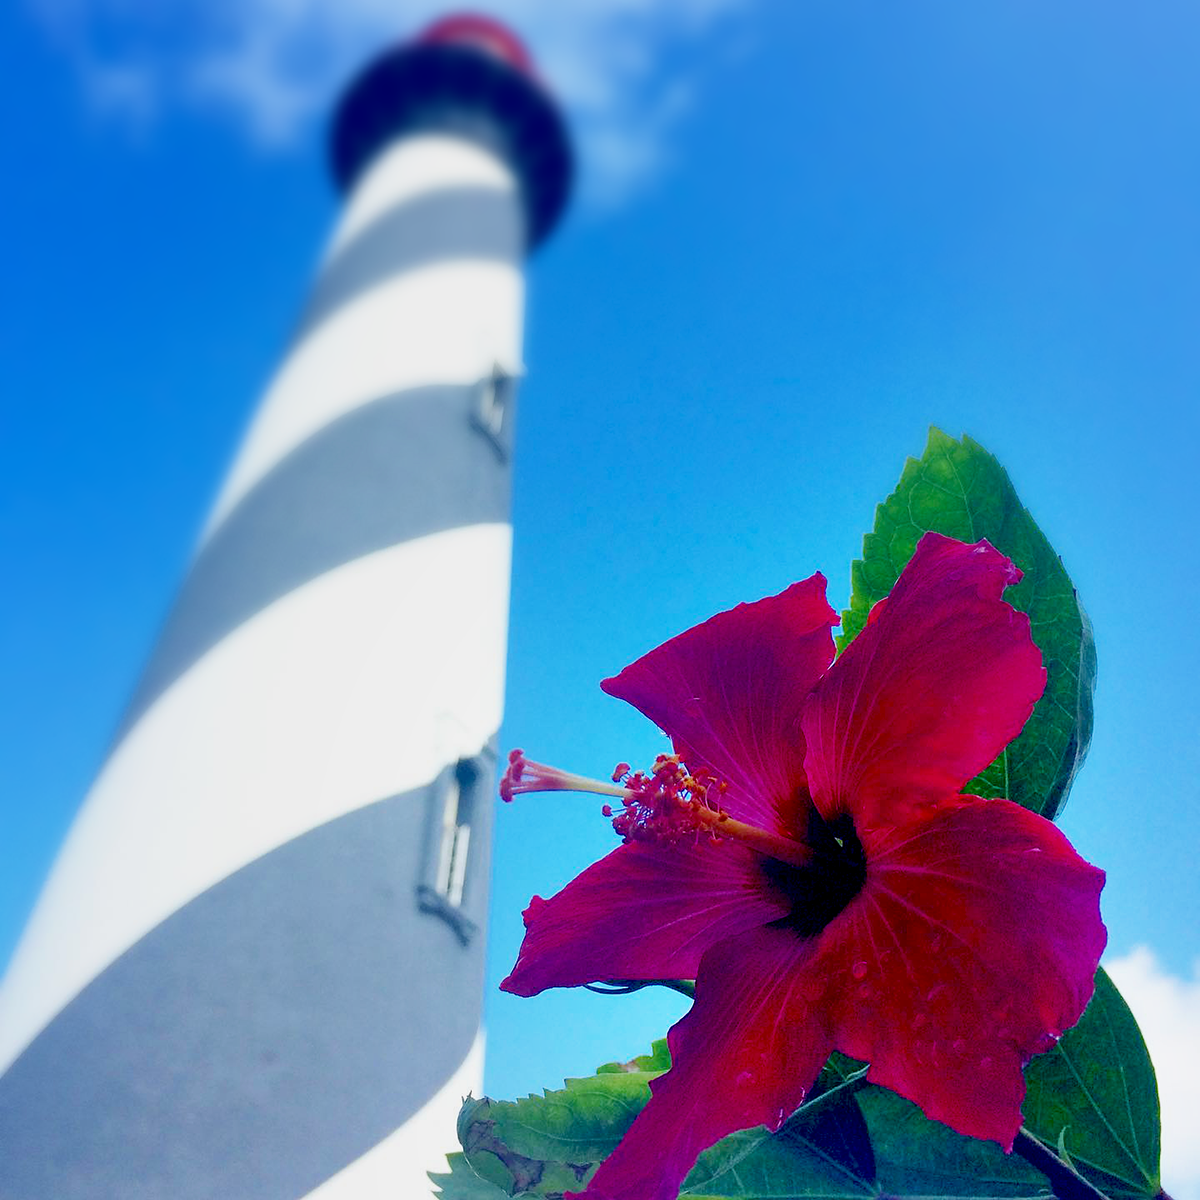 Hibiscaus flower and the St. Augustine Lighthouse from the outside